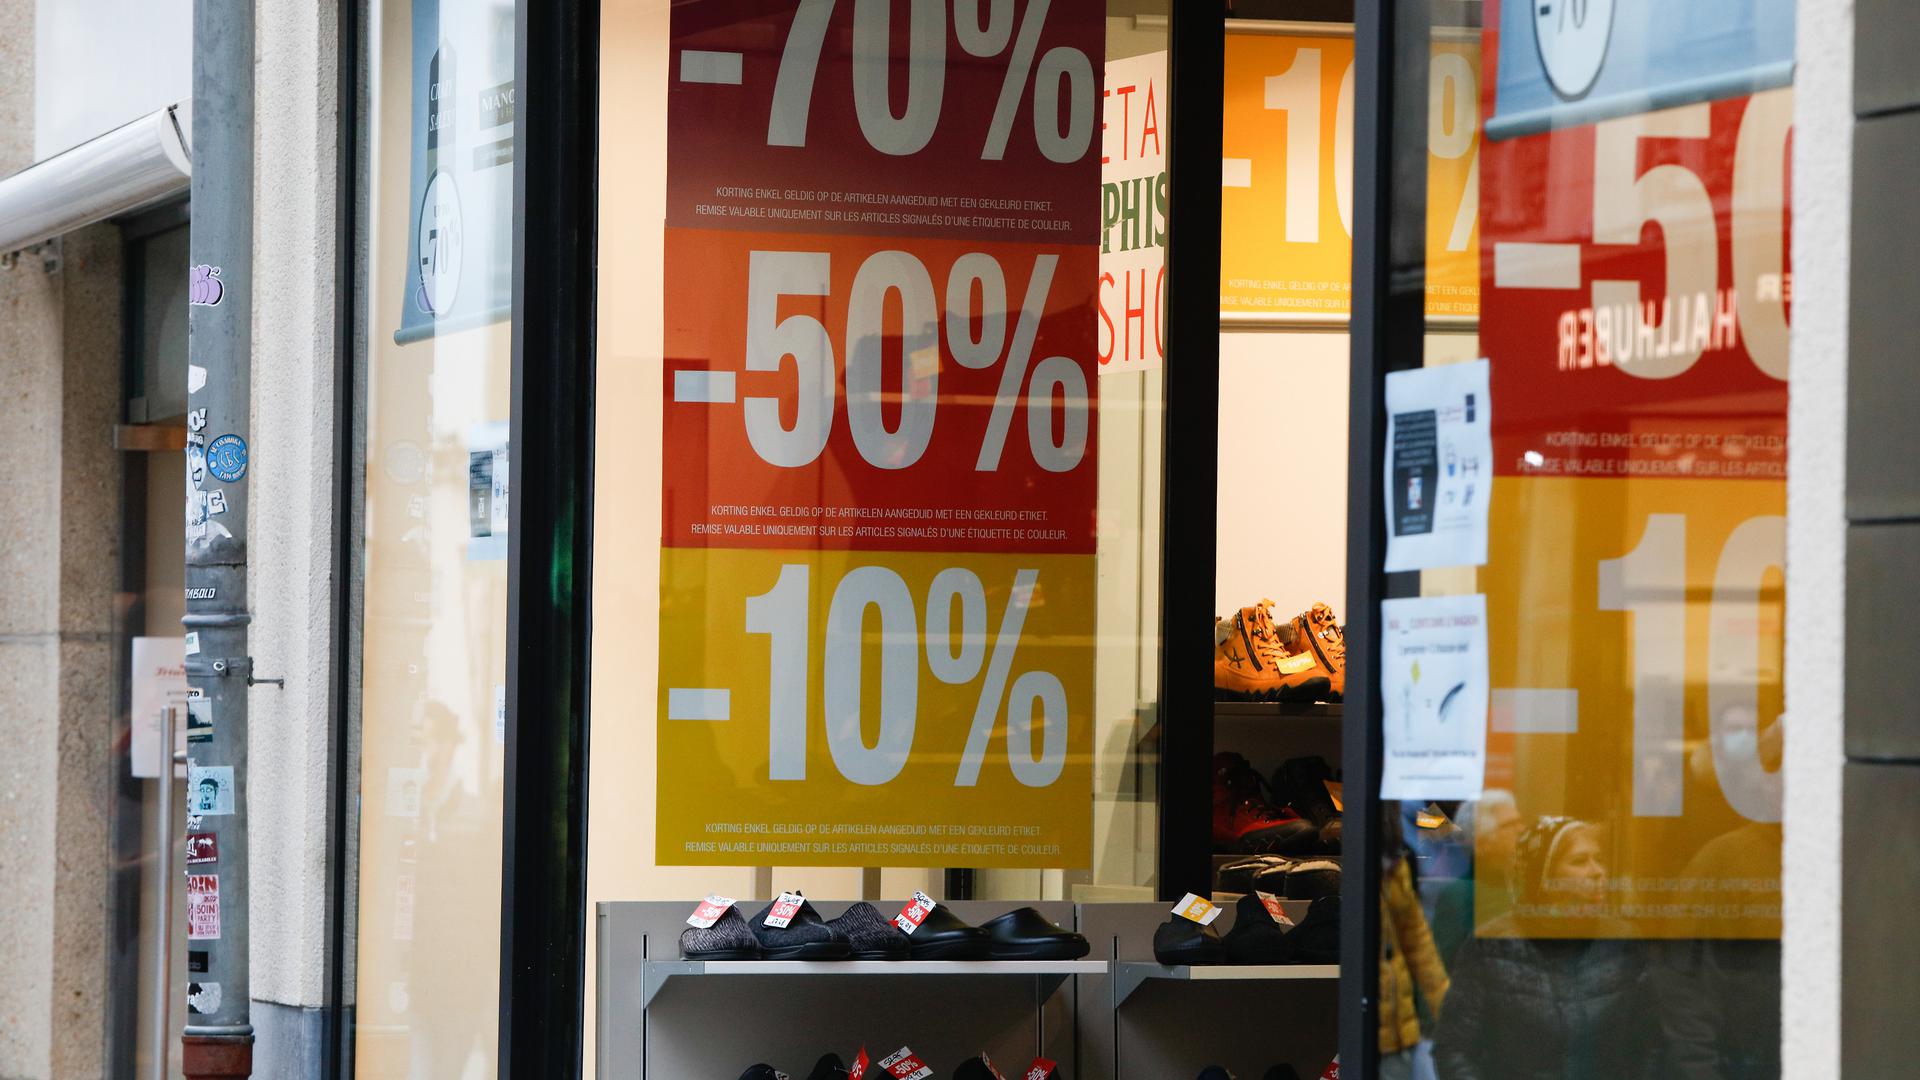 Sales have been cited as the main reason for the fall in inflation in July this year